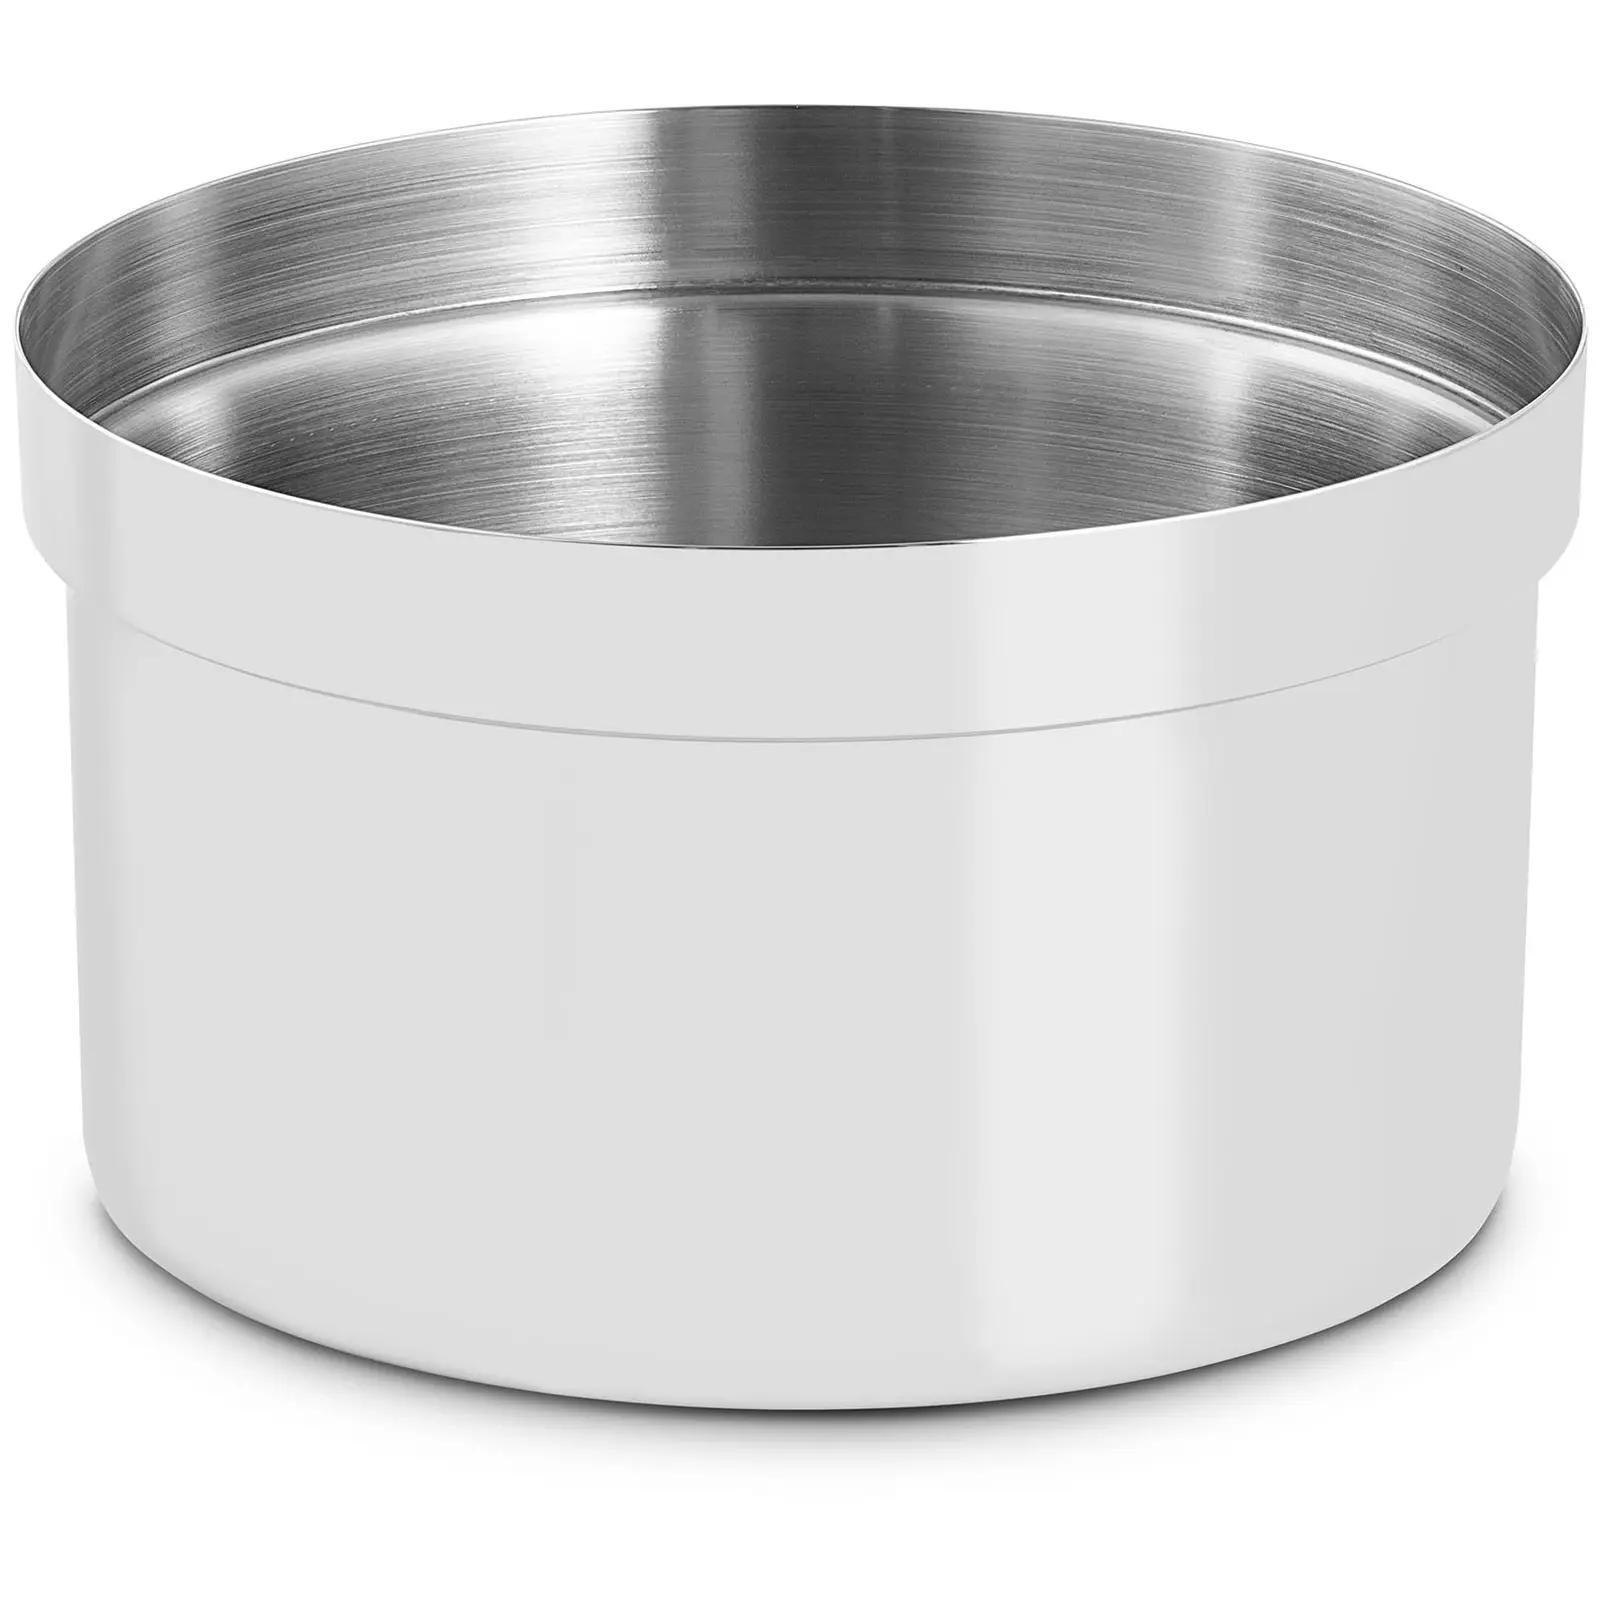 Stainless Steel Bowl - ⌀230 x 135 mm